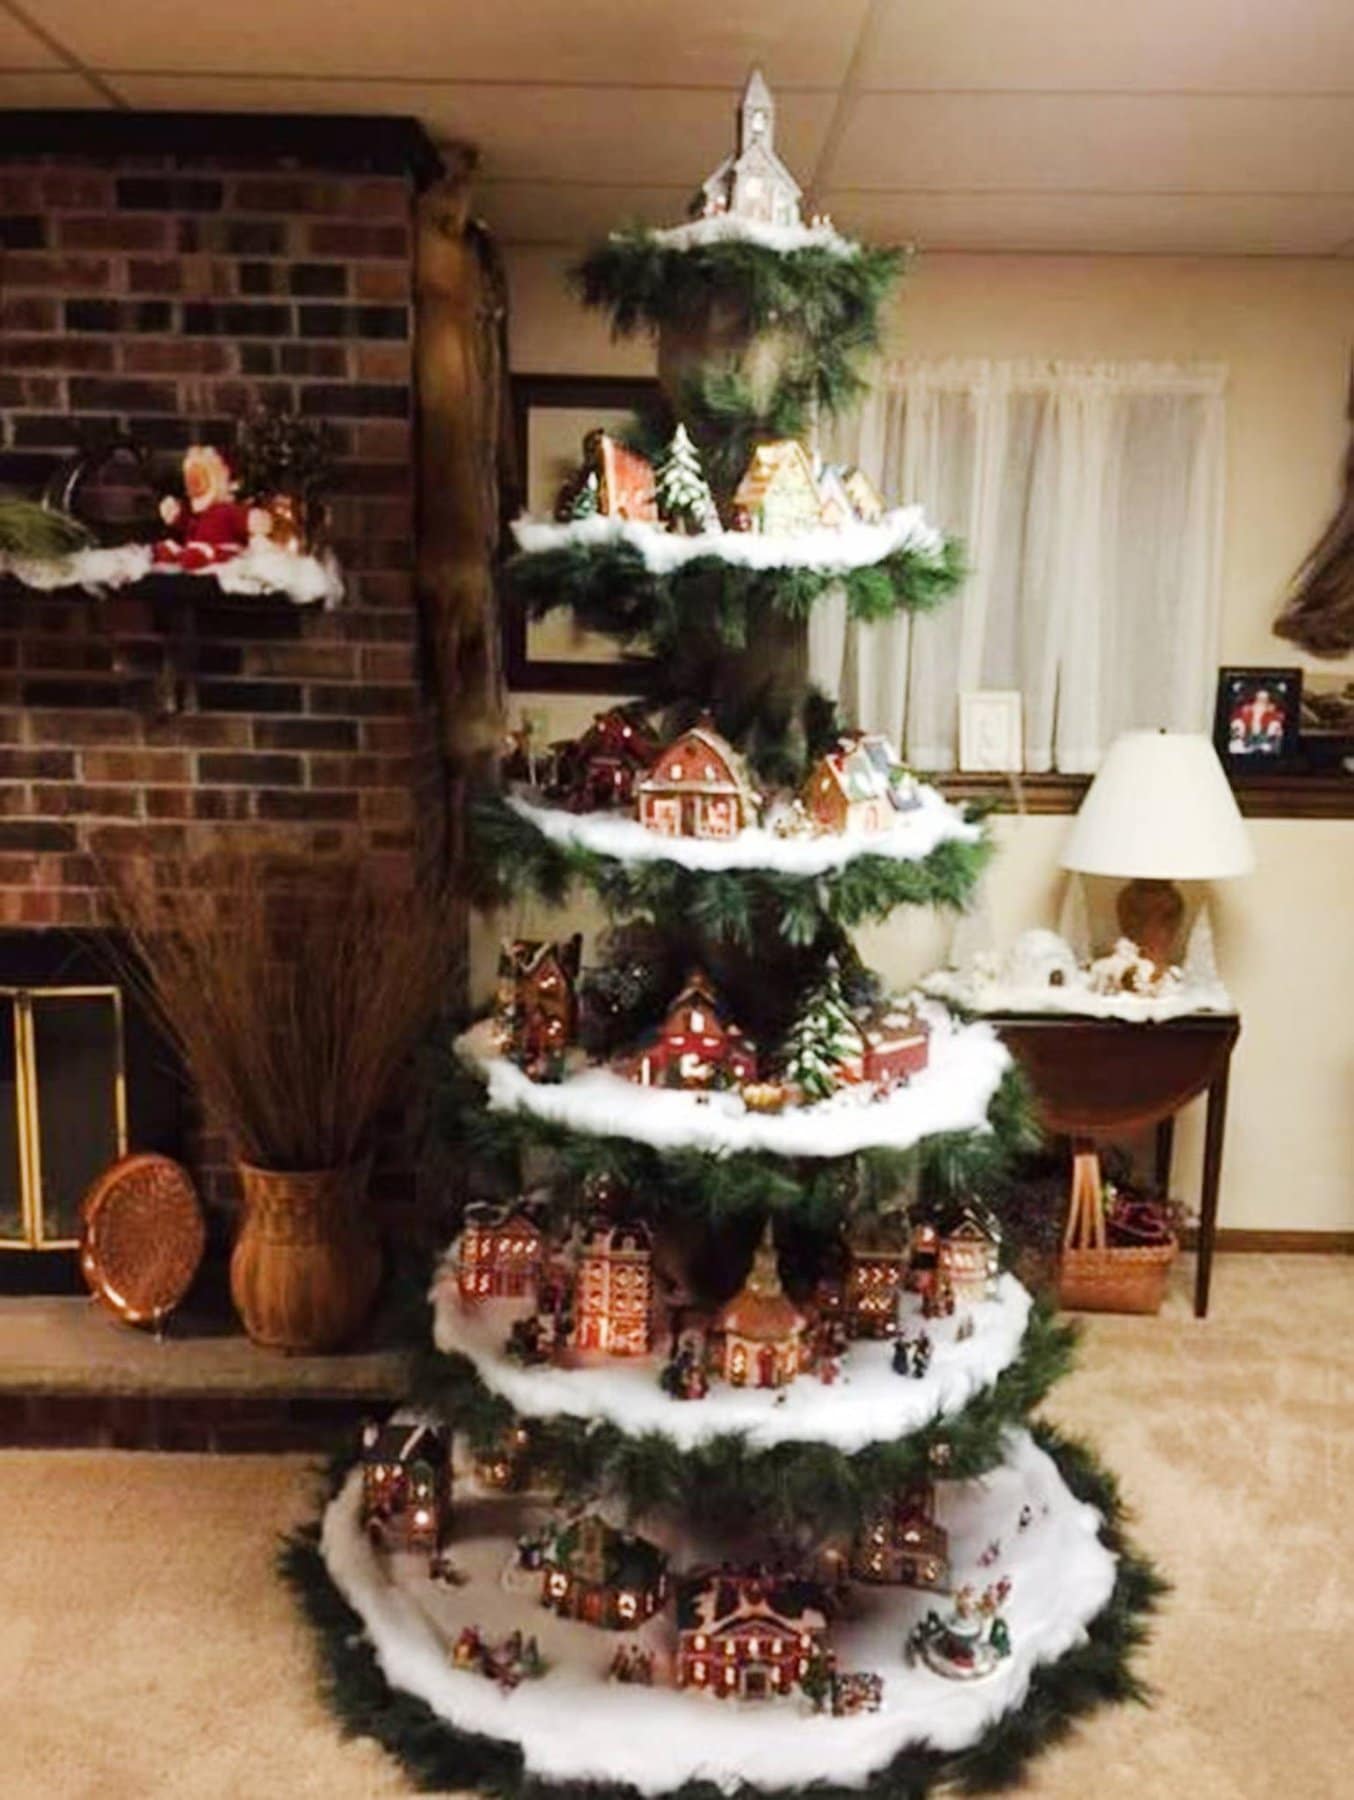 Christmas Village Tree...these are the most Creative Christmas Tree Ideas!